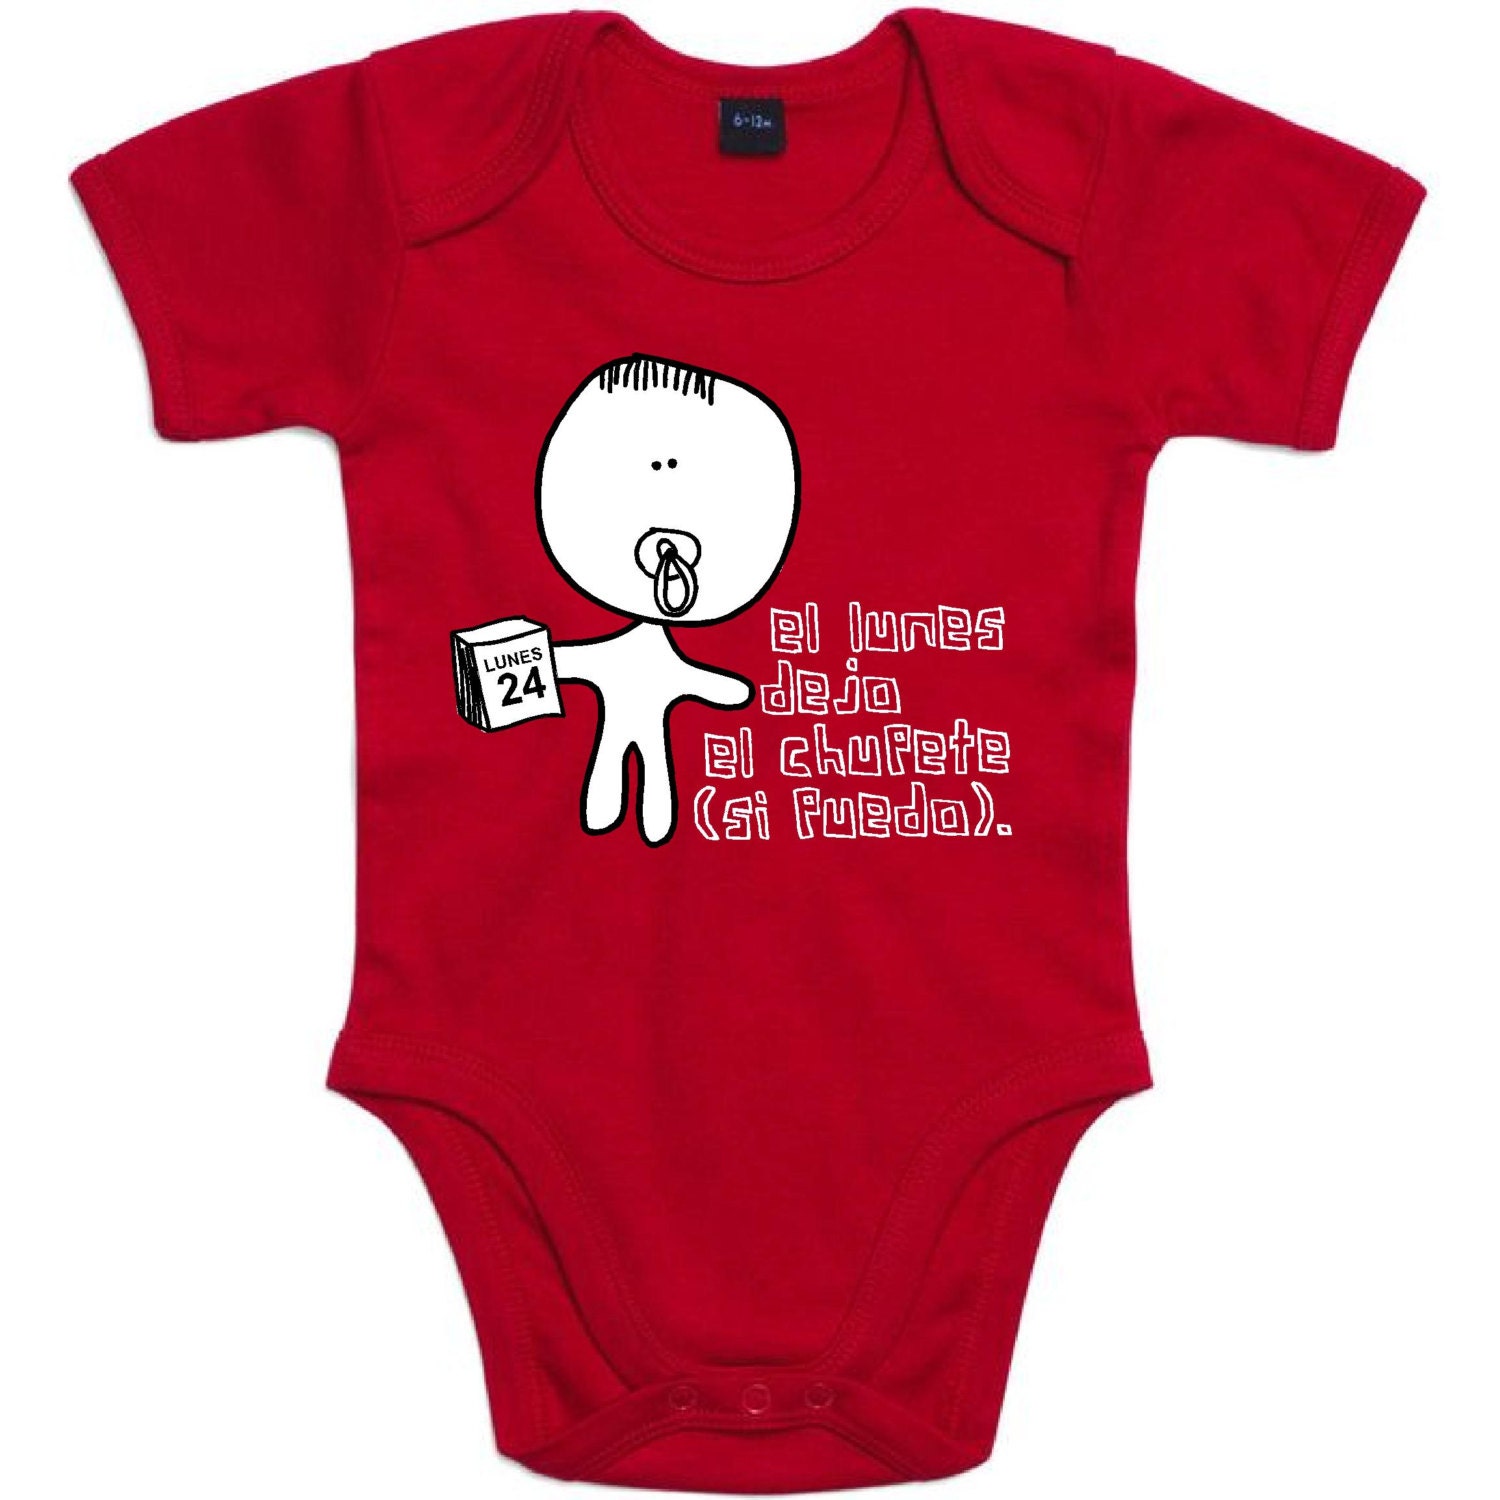 Funny Baby Cute Baby clothes Unisex baby clothes by LaTipo